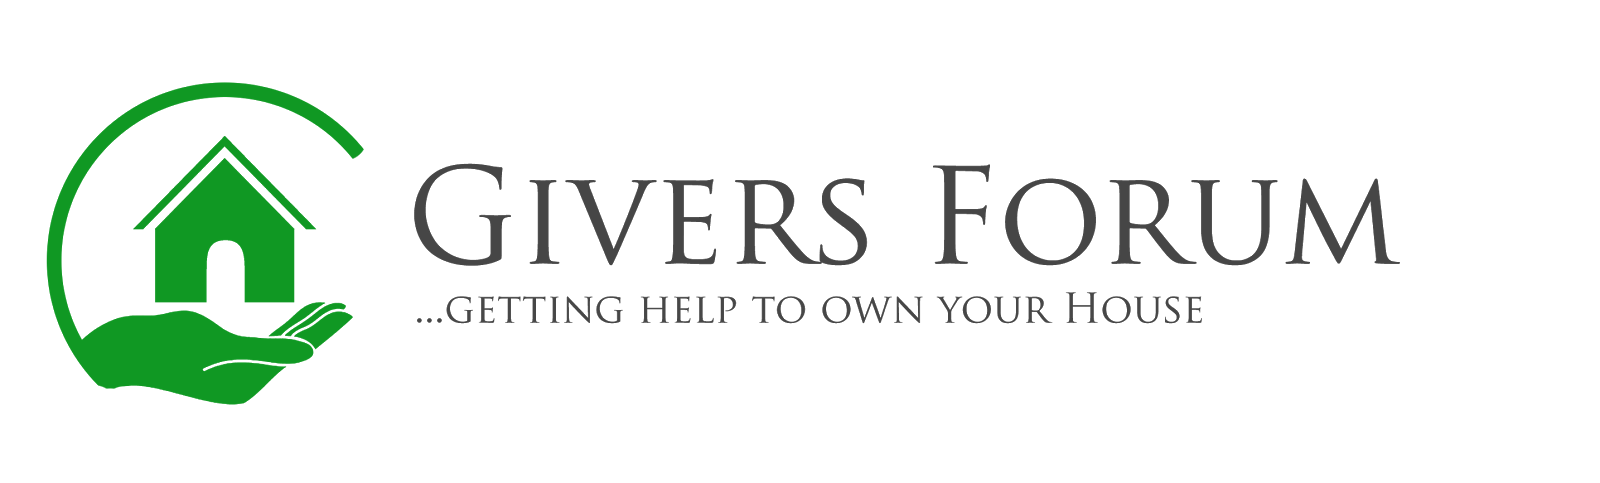 GIVERS FORUM